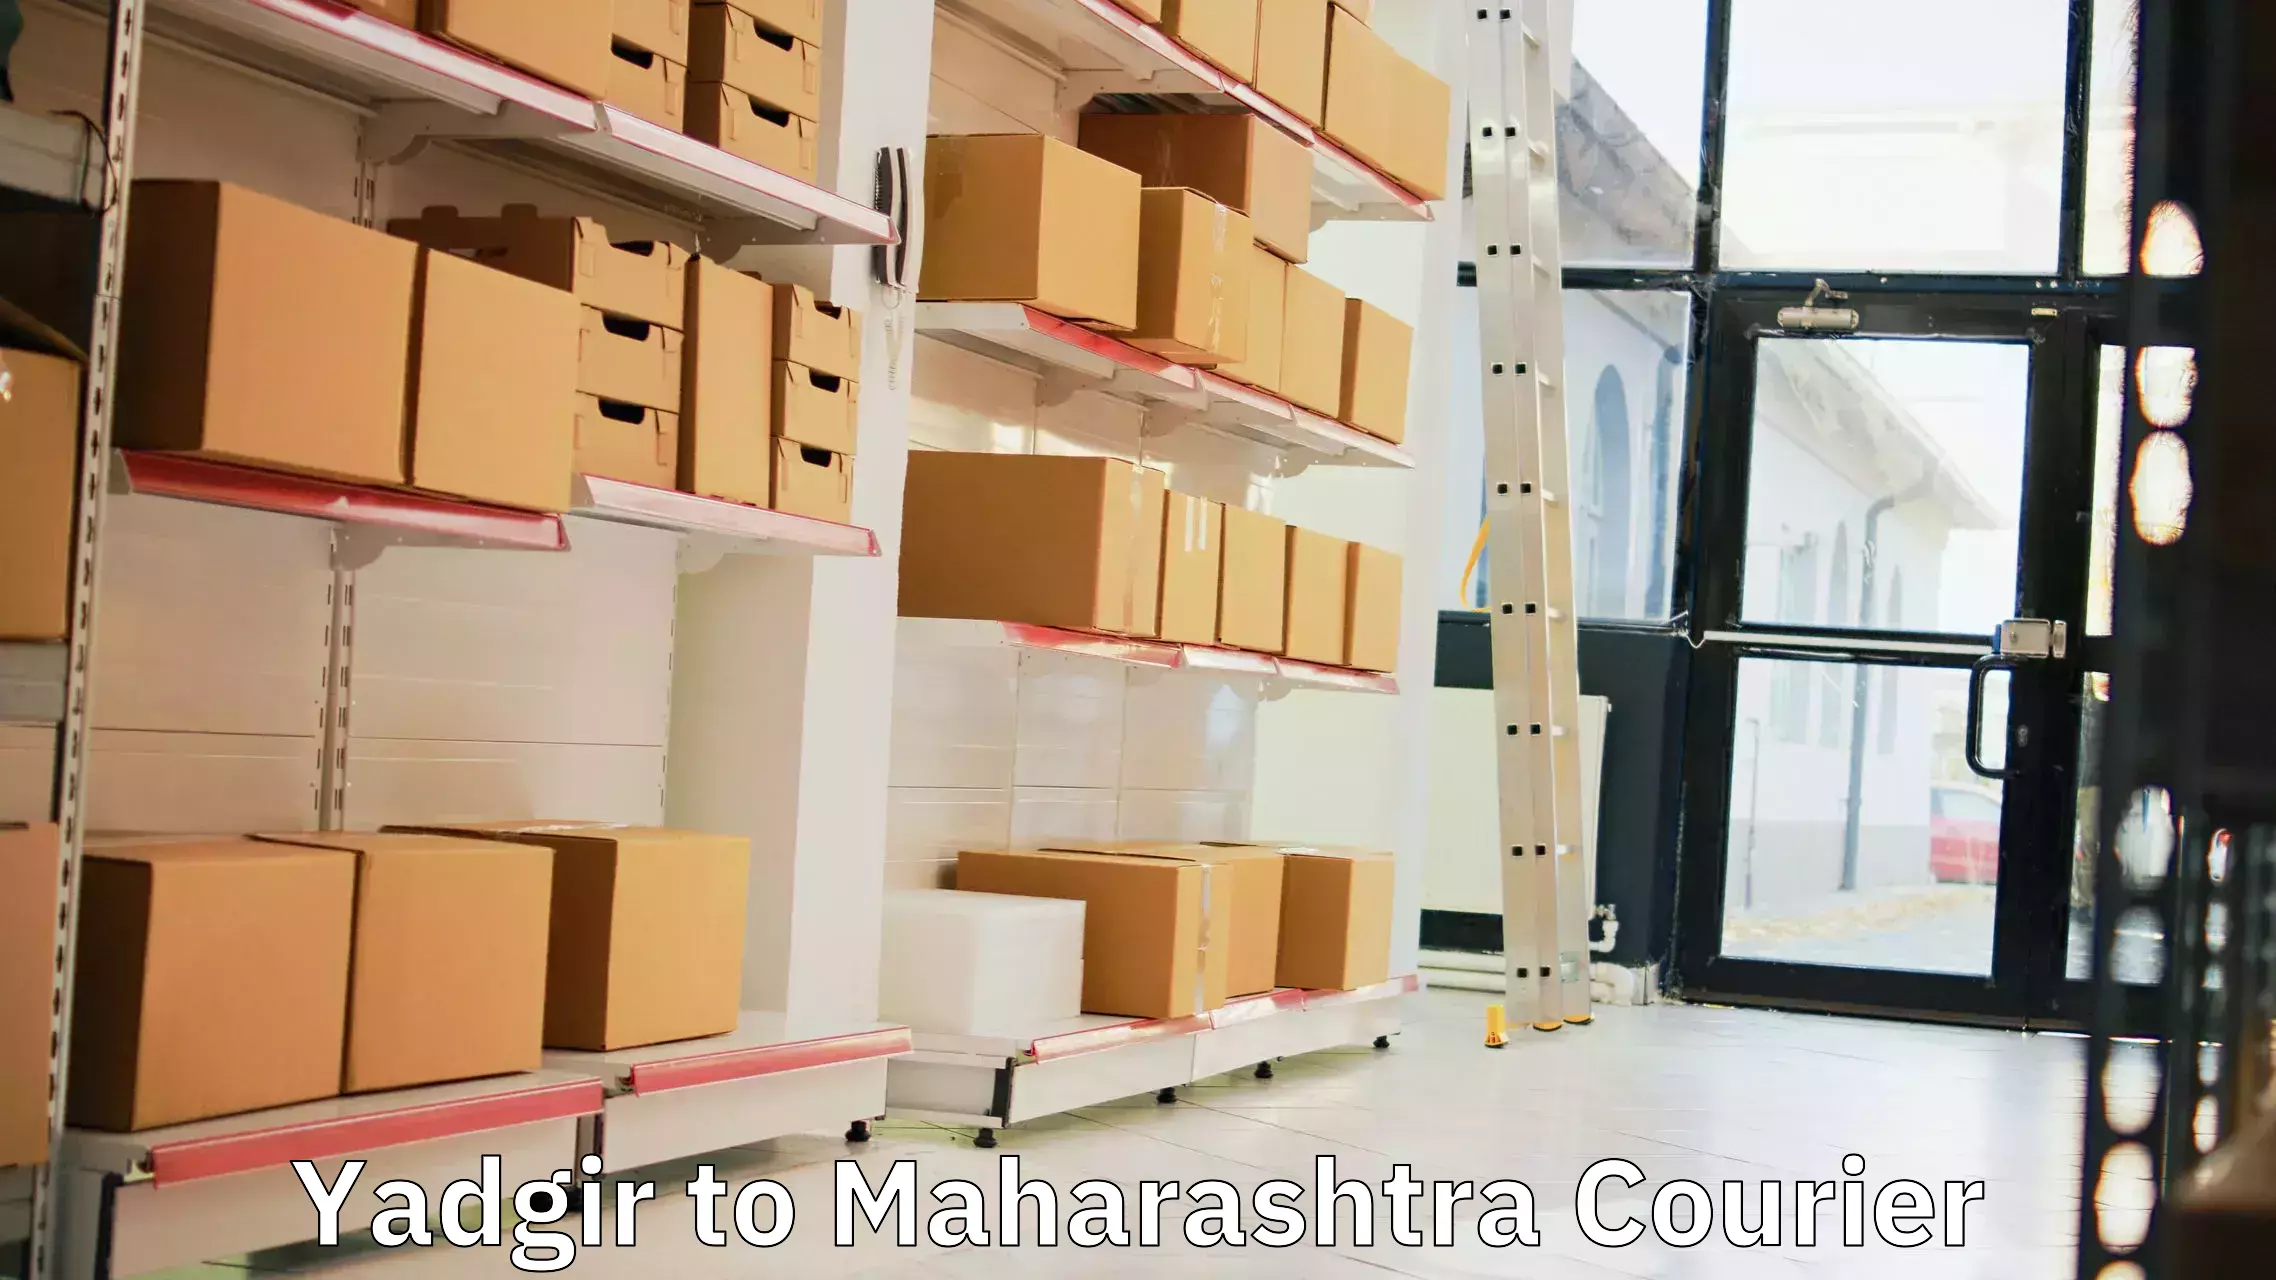 Courier tracking online Yadgir to Bhandara